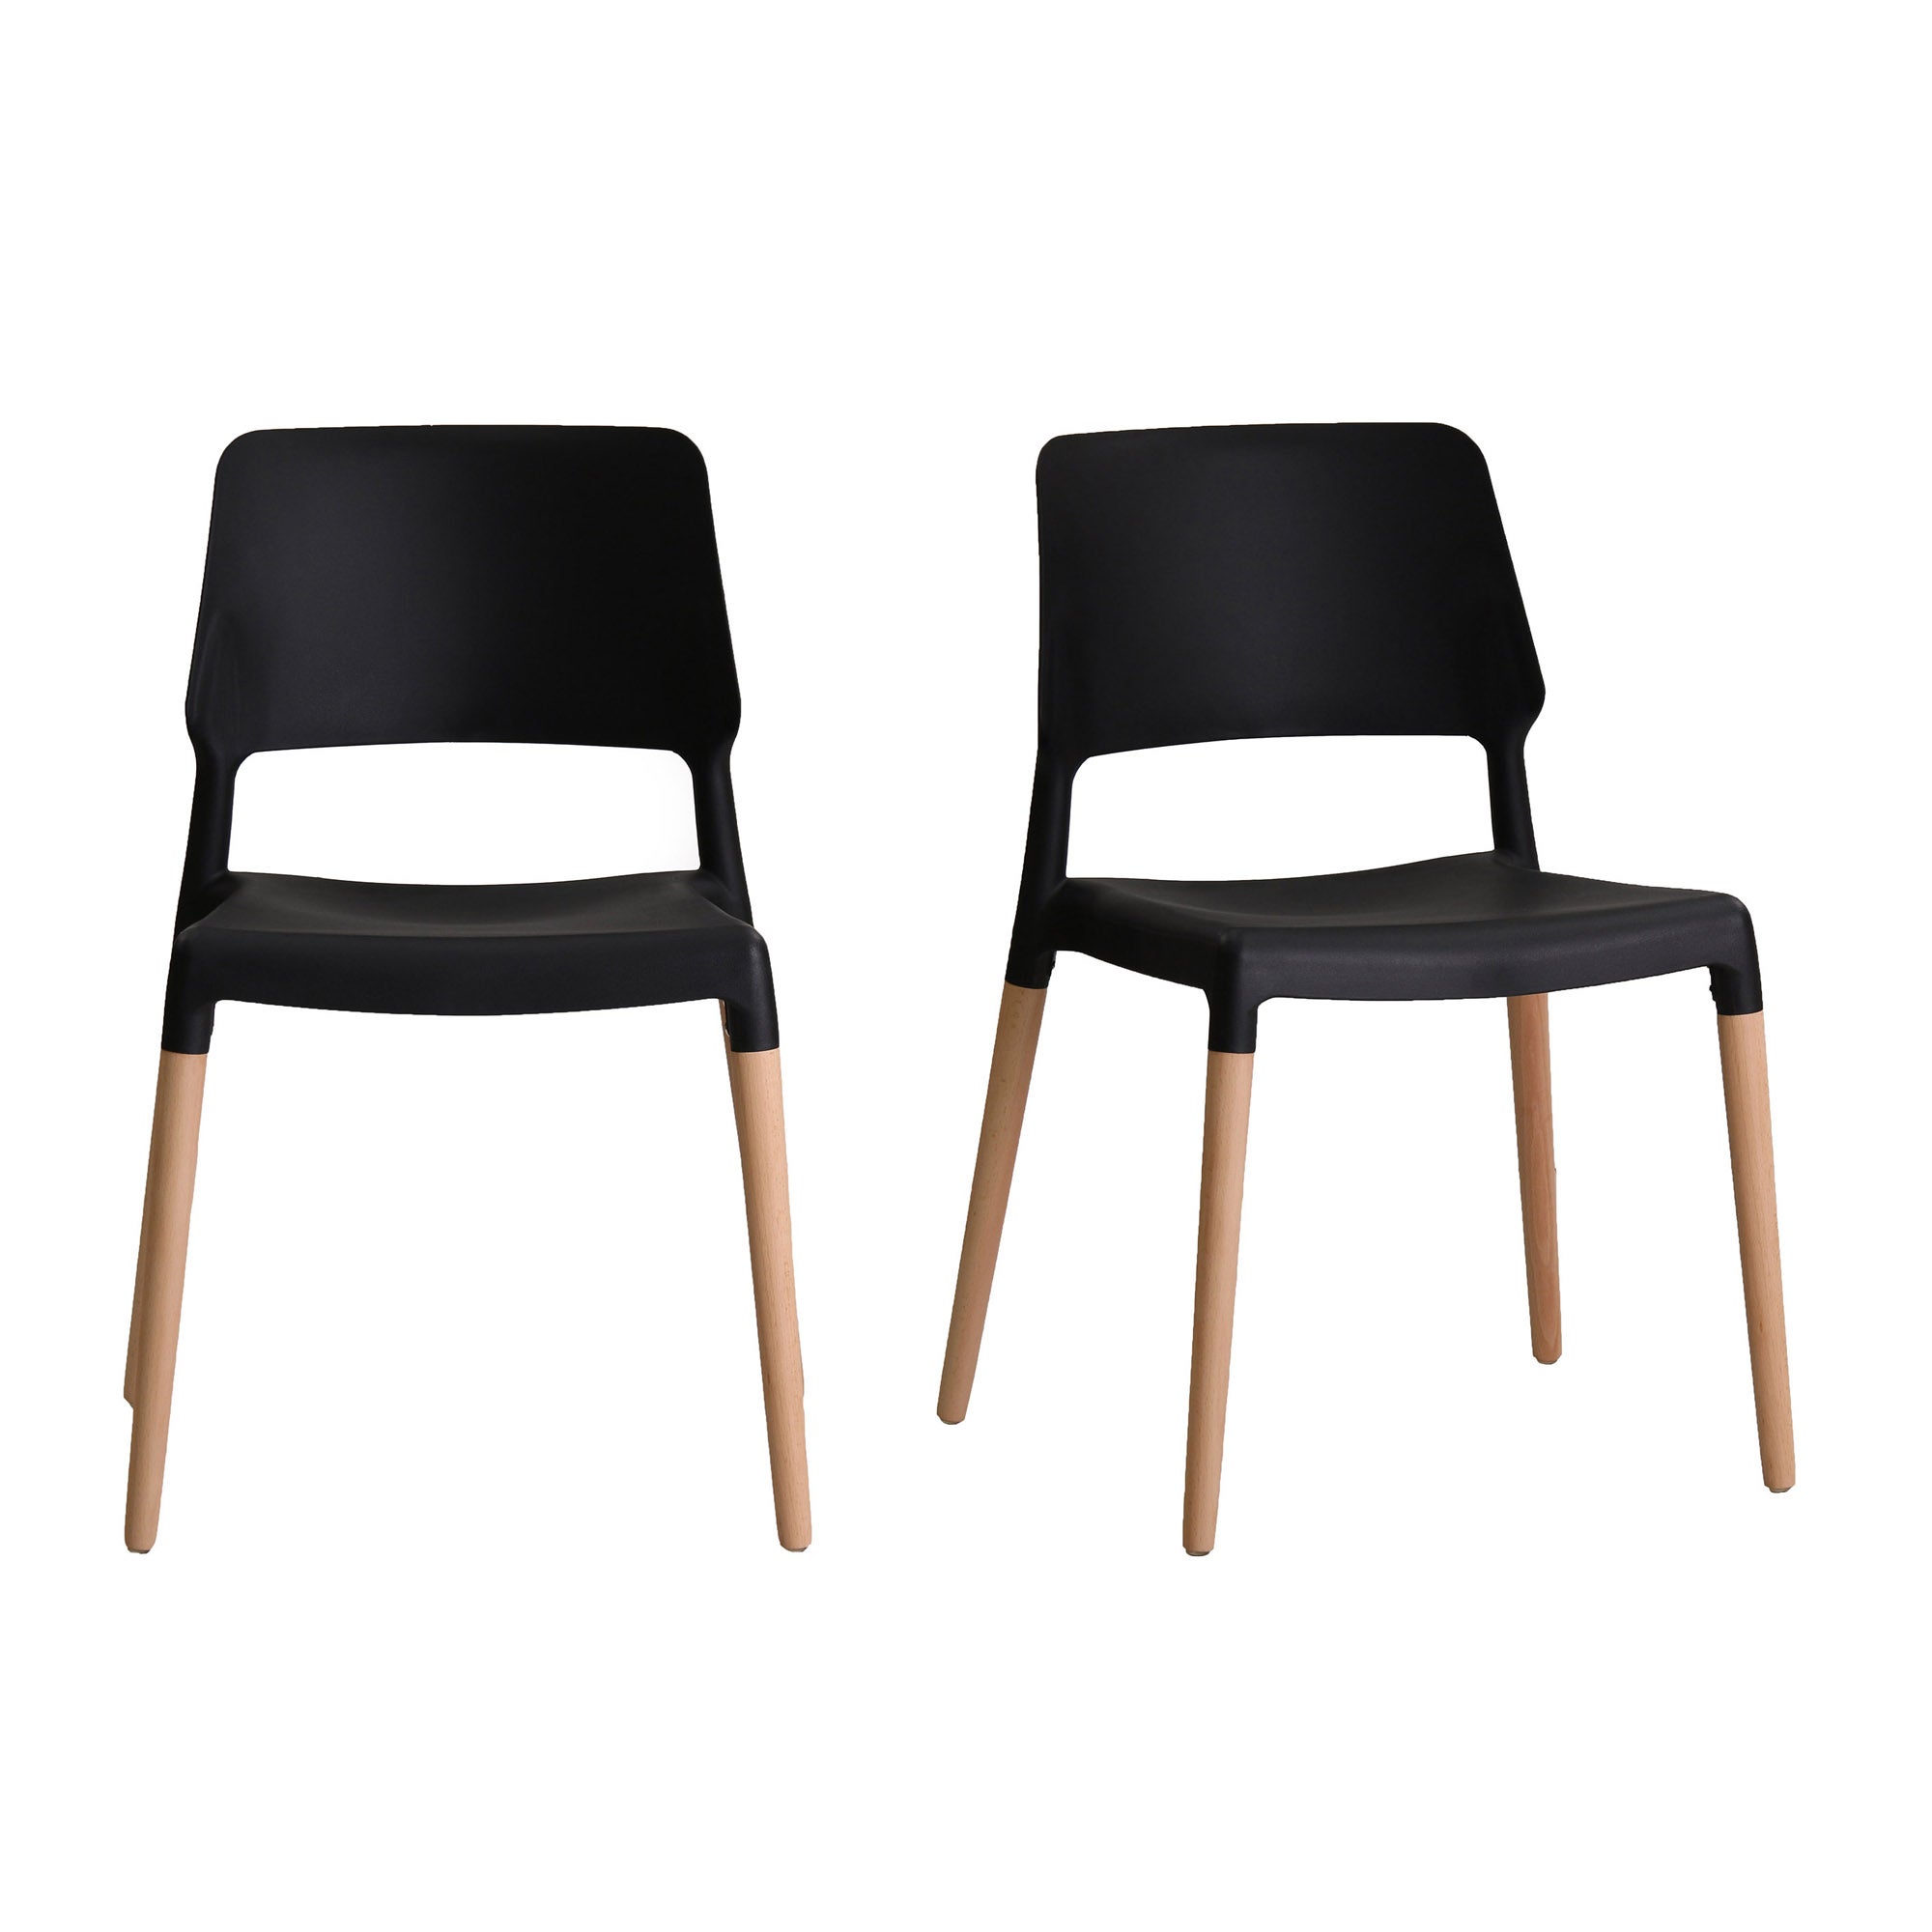 Reims Set Of 2 Dining Chairs Black